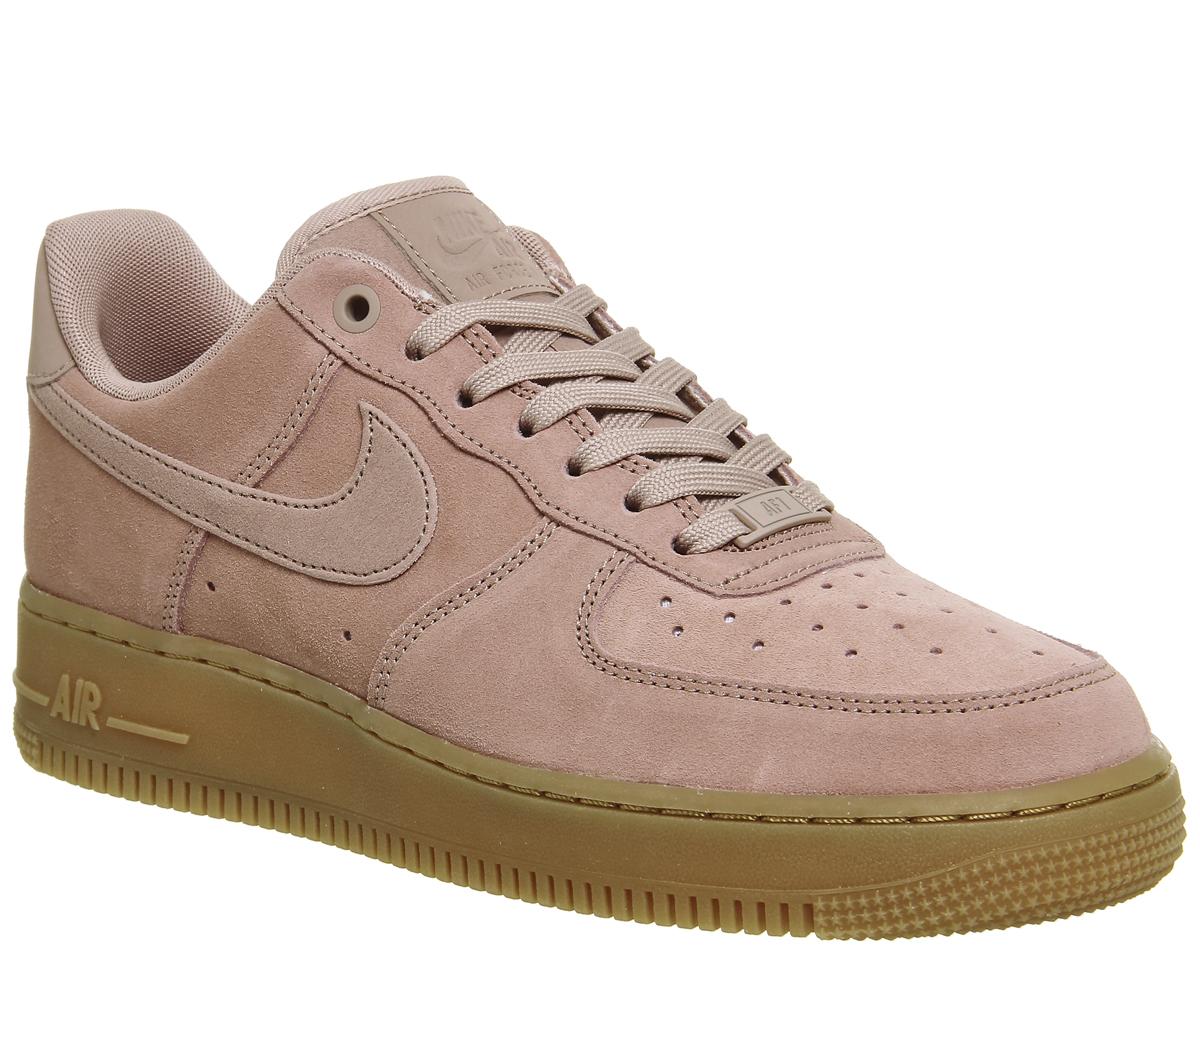 Nike Nike Air Force One Trainers Particle Pink Gum His Trainers